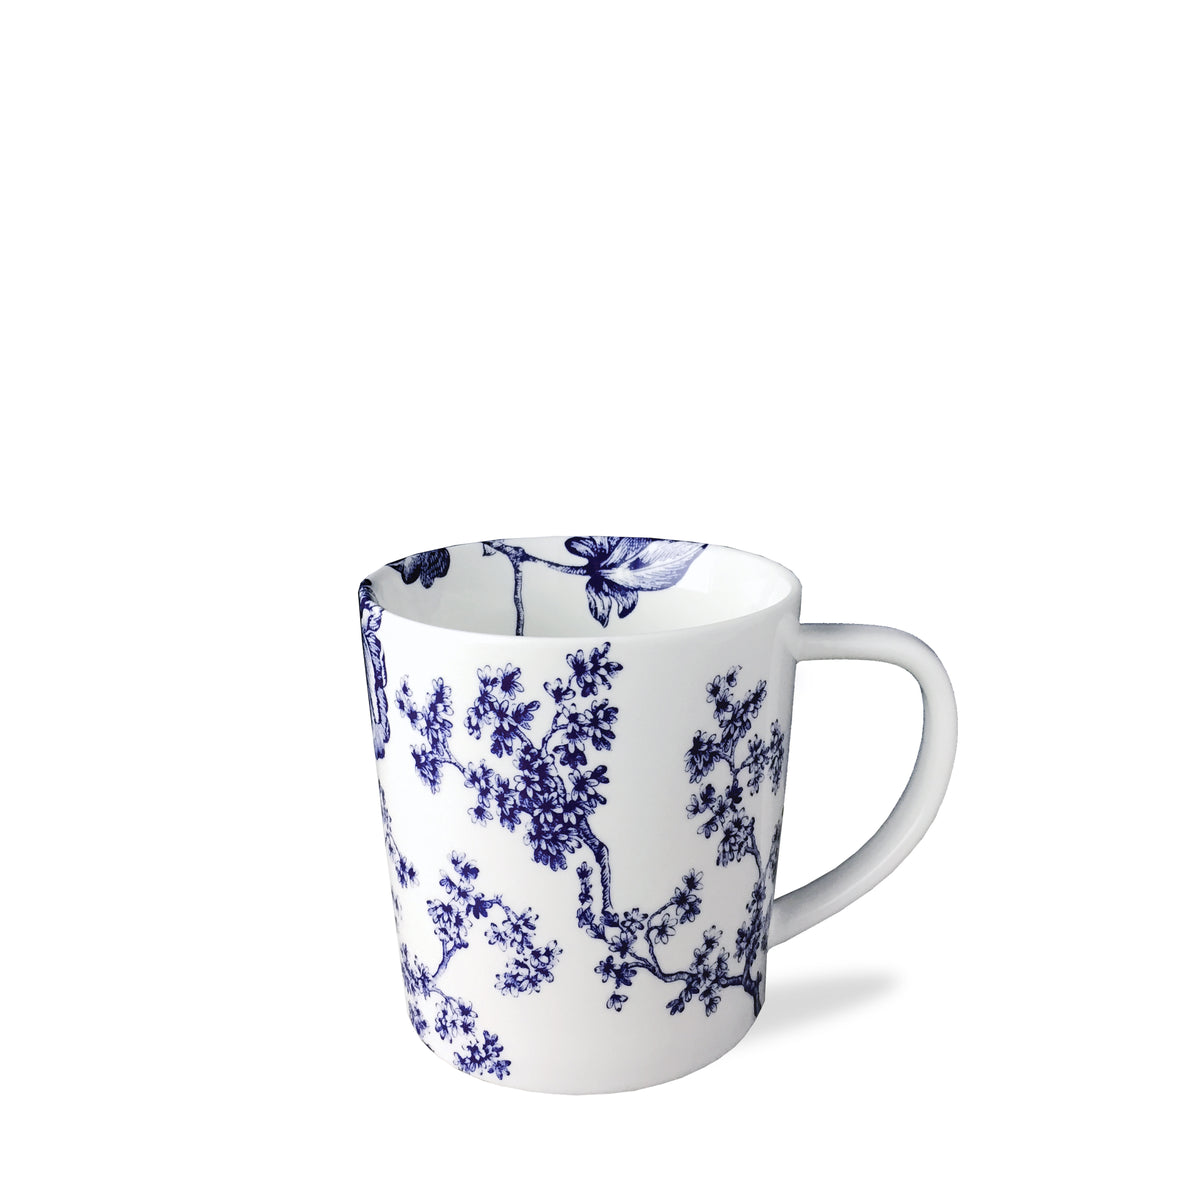 A Chinoiserie Toile Mug by Caskata Artisanal Home with a handle featuring blue floral patterns, exuding timeless elegance reminiscent of Chinoiserie Toile.